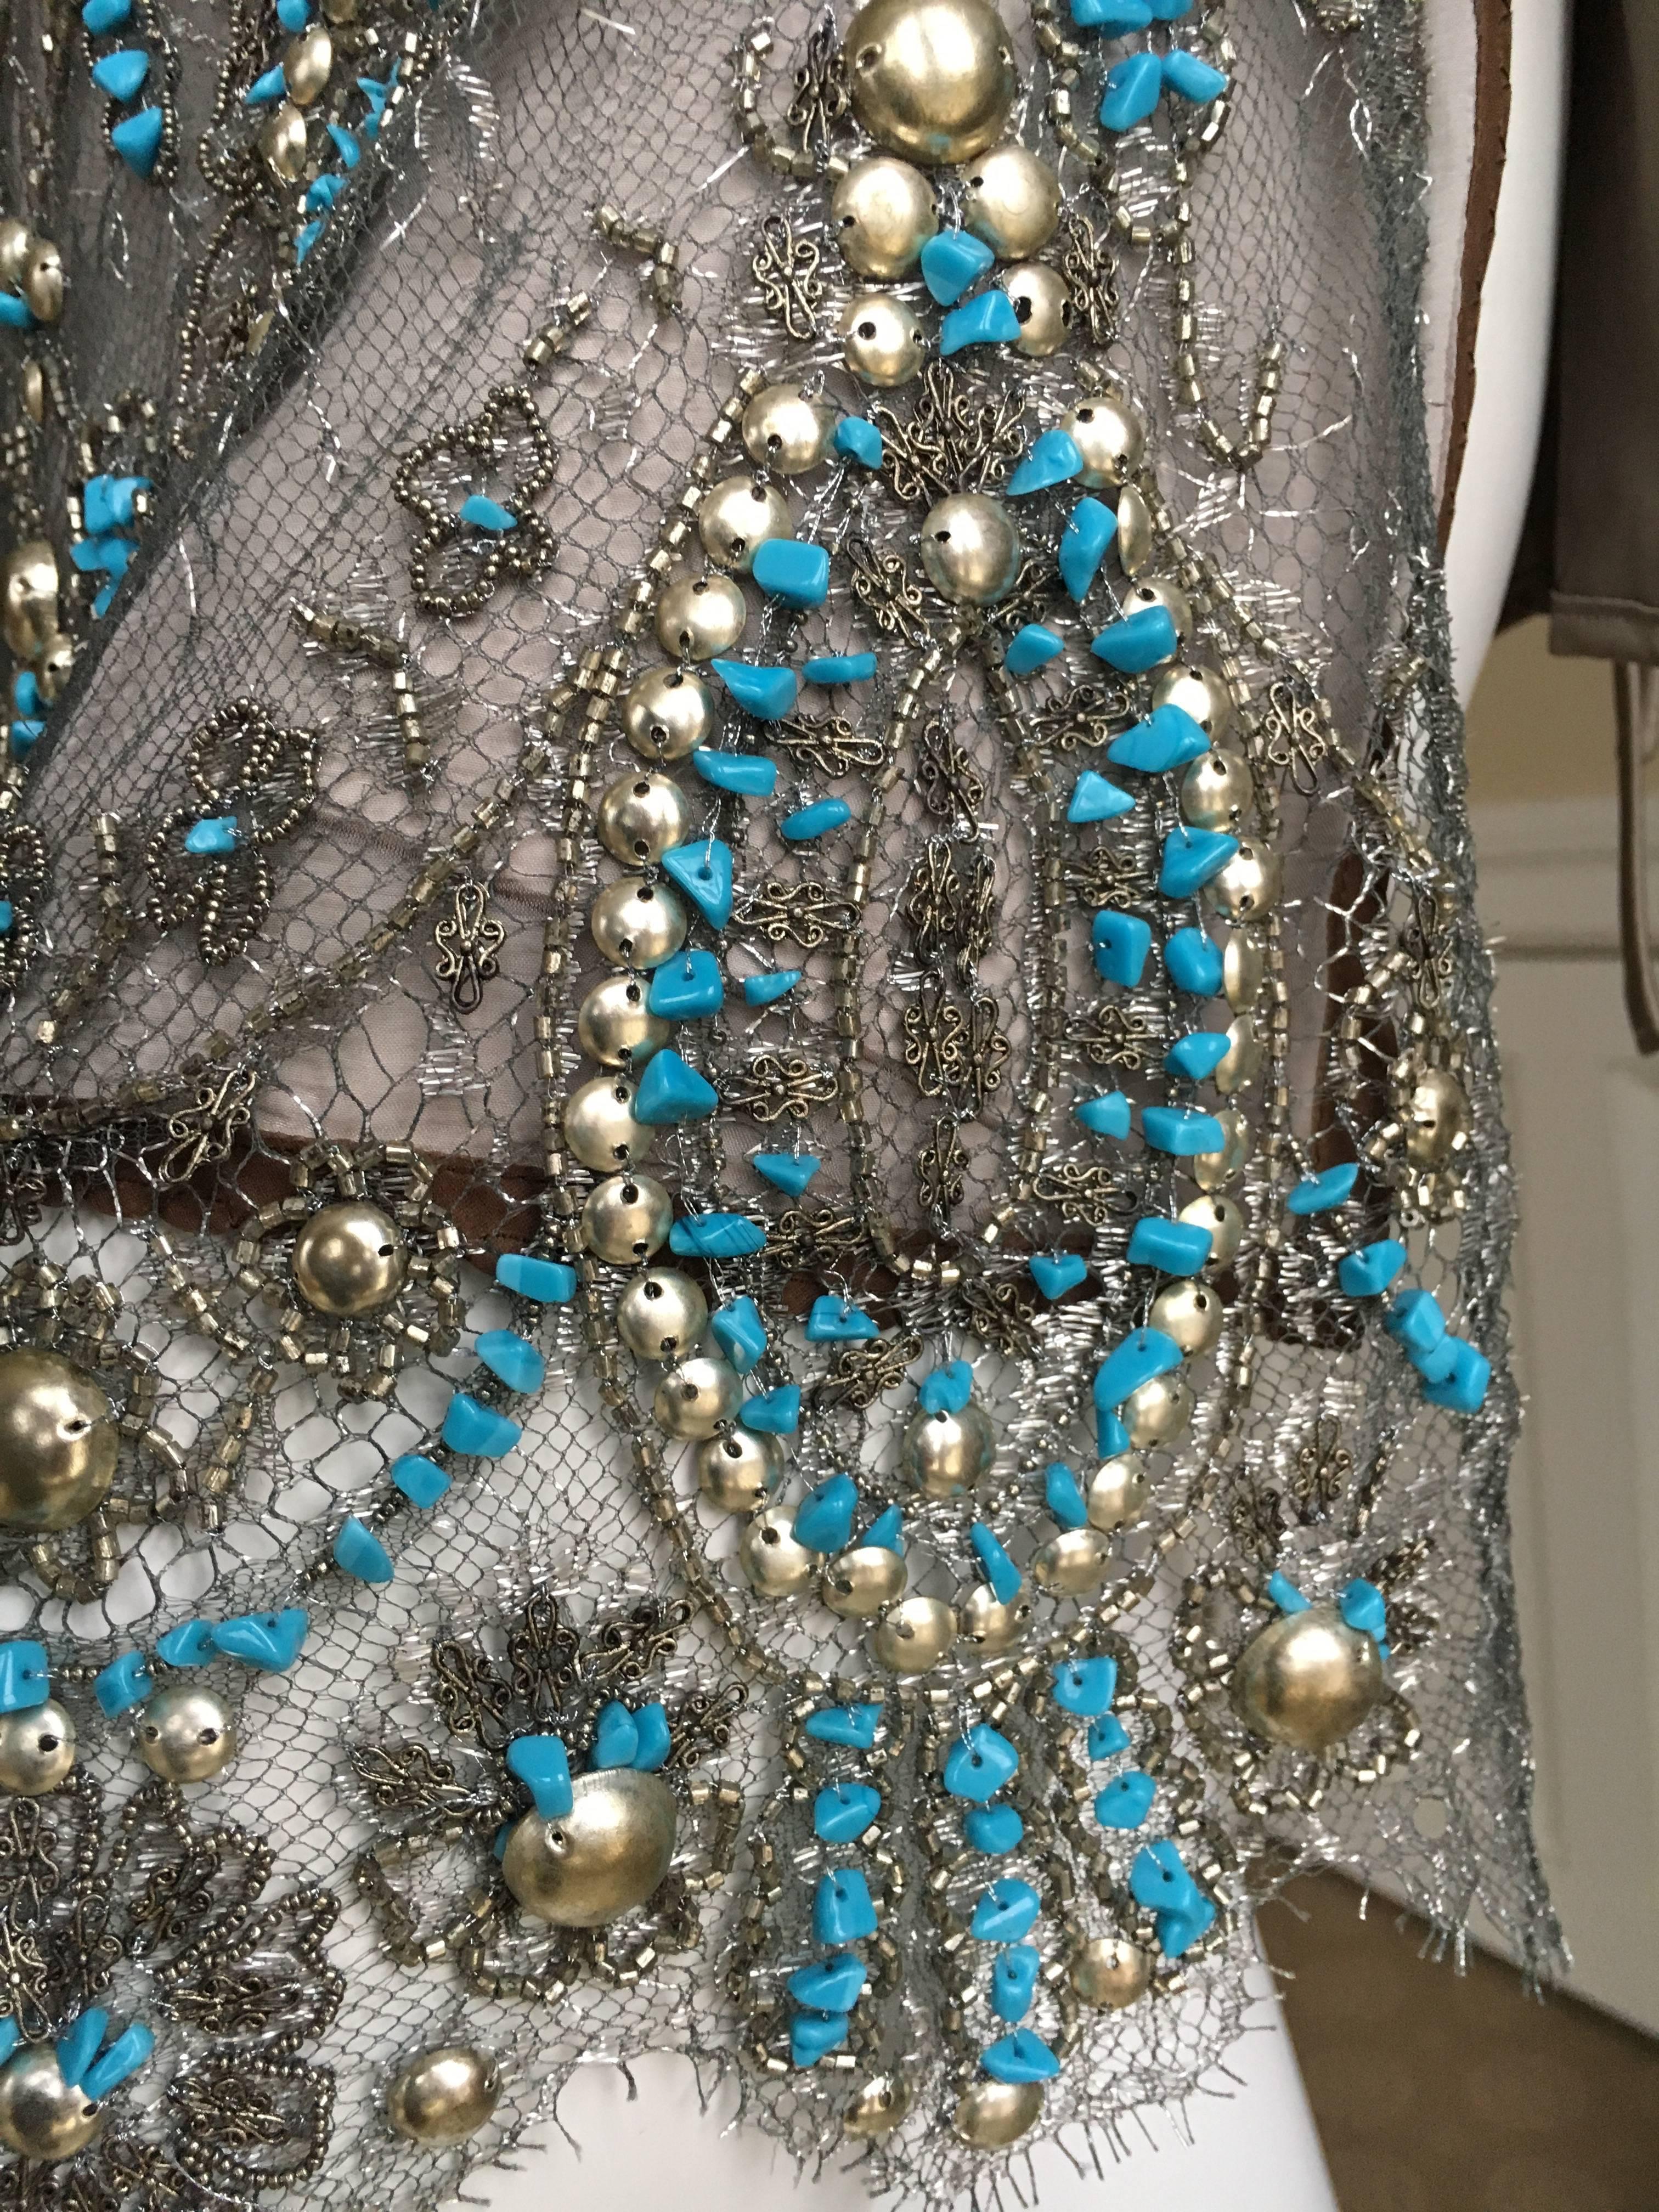 Gianfranco Ferre Silver Lace Tunic with Couture Quality Turquoise Embellishment For Sale 4